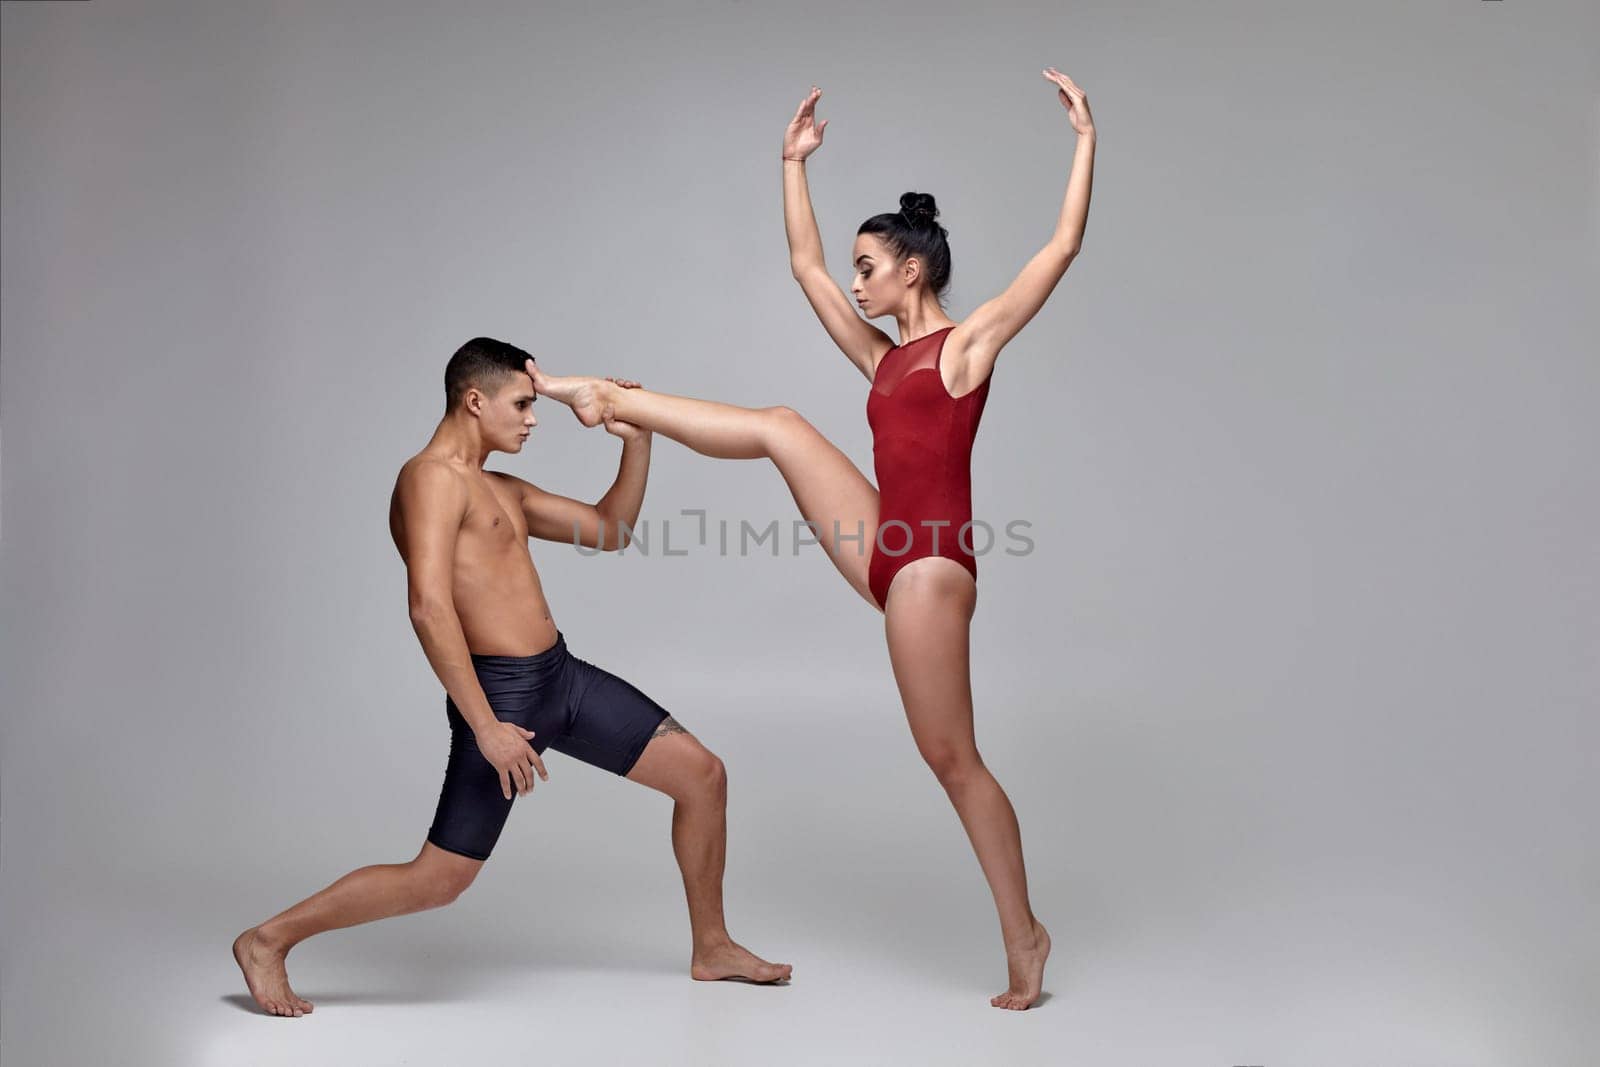 Couple of a wonderful ballet dancers are posing against a gray studio background. Handsome guy in black shorts and beautiful woman in a red swimwear are dancing together. Ballet and contemporary choreography concept. Art photo.